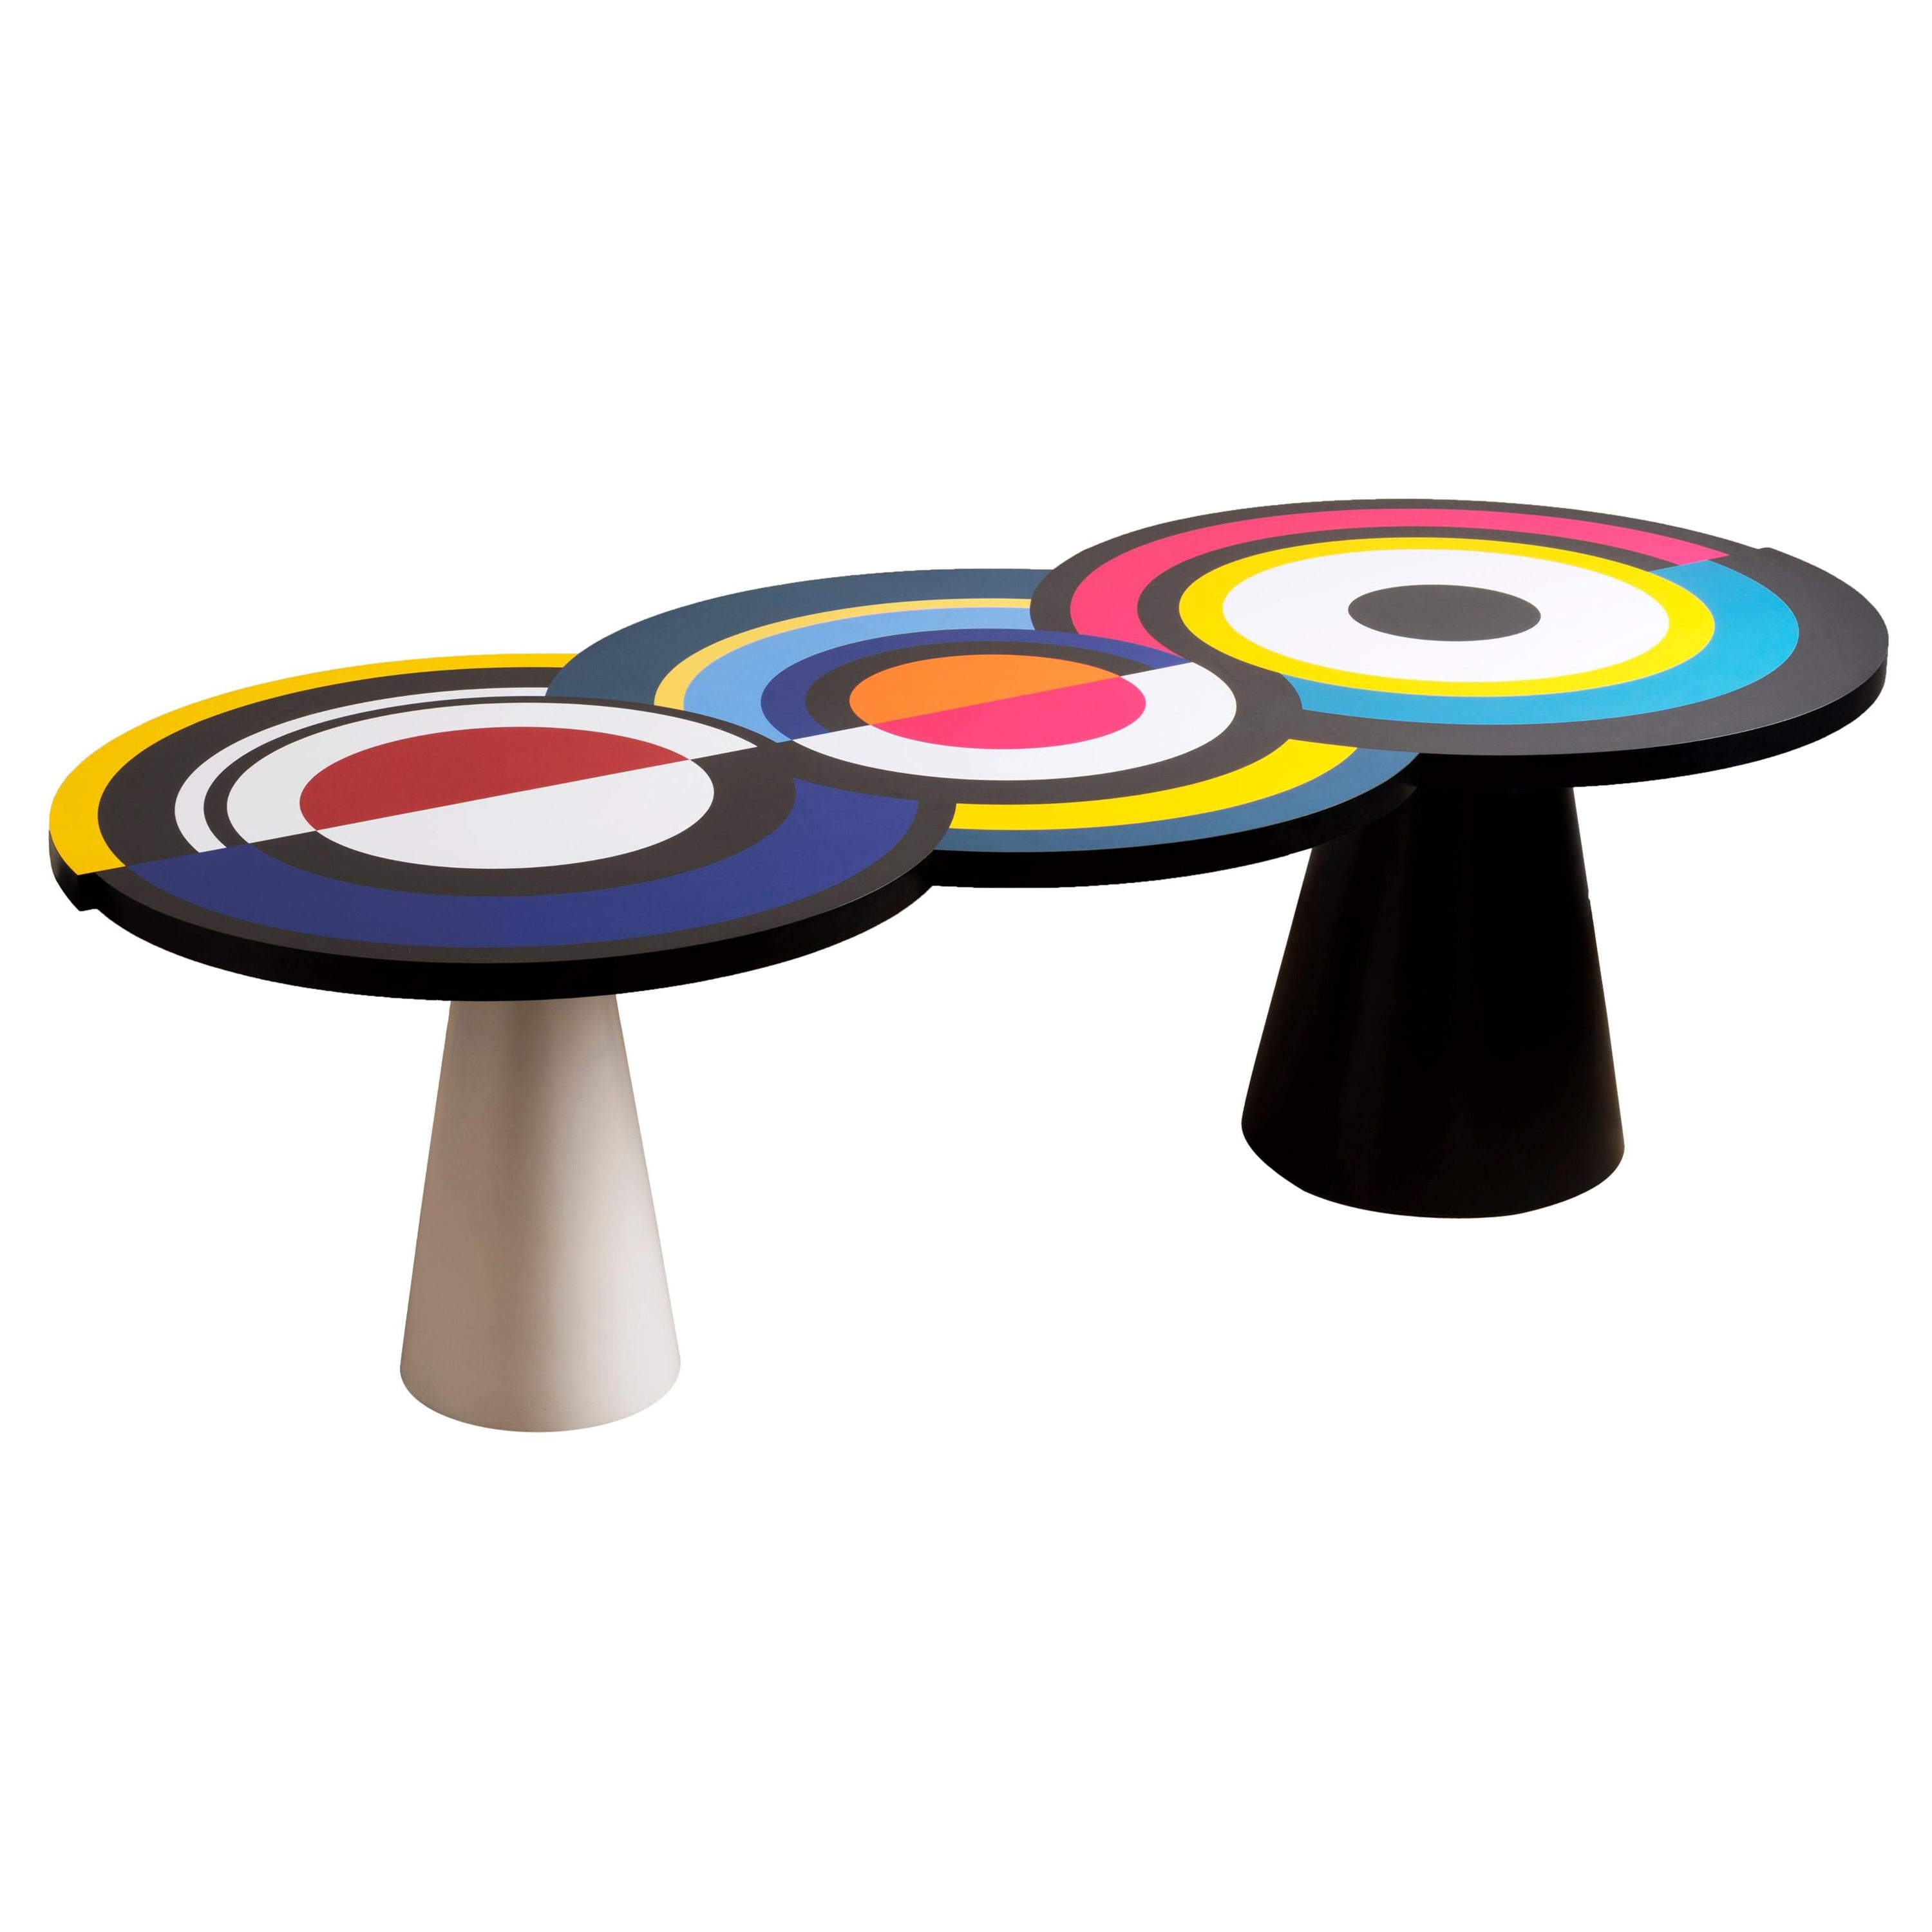 Homage to Delaunay Dining Table by Thomas Dariel For Sale